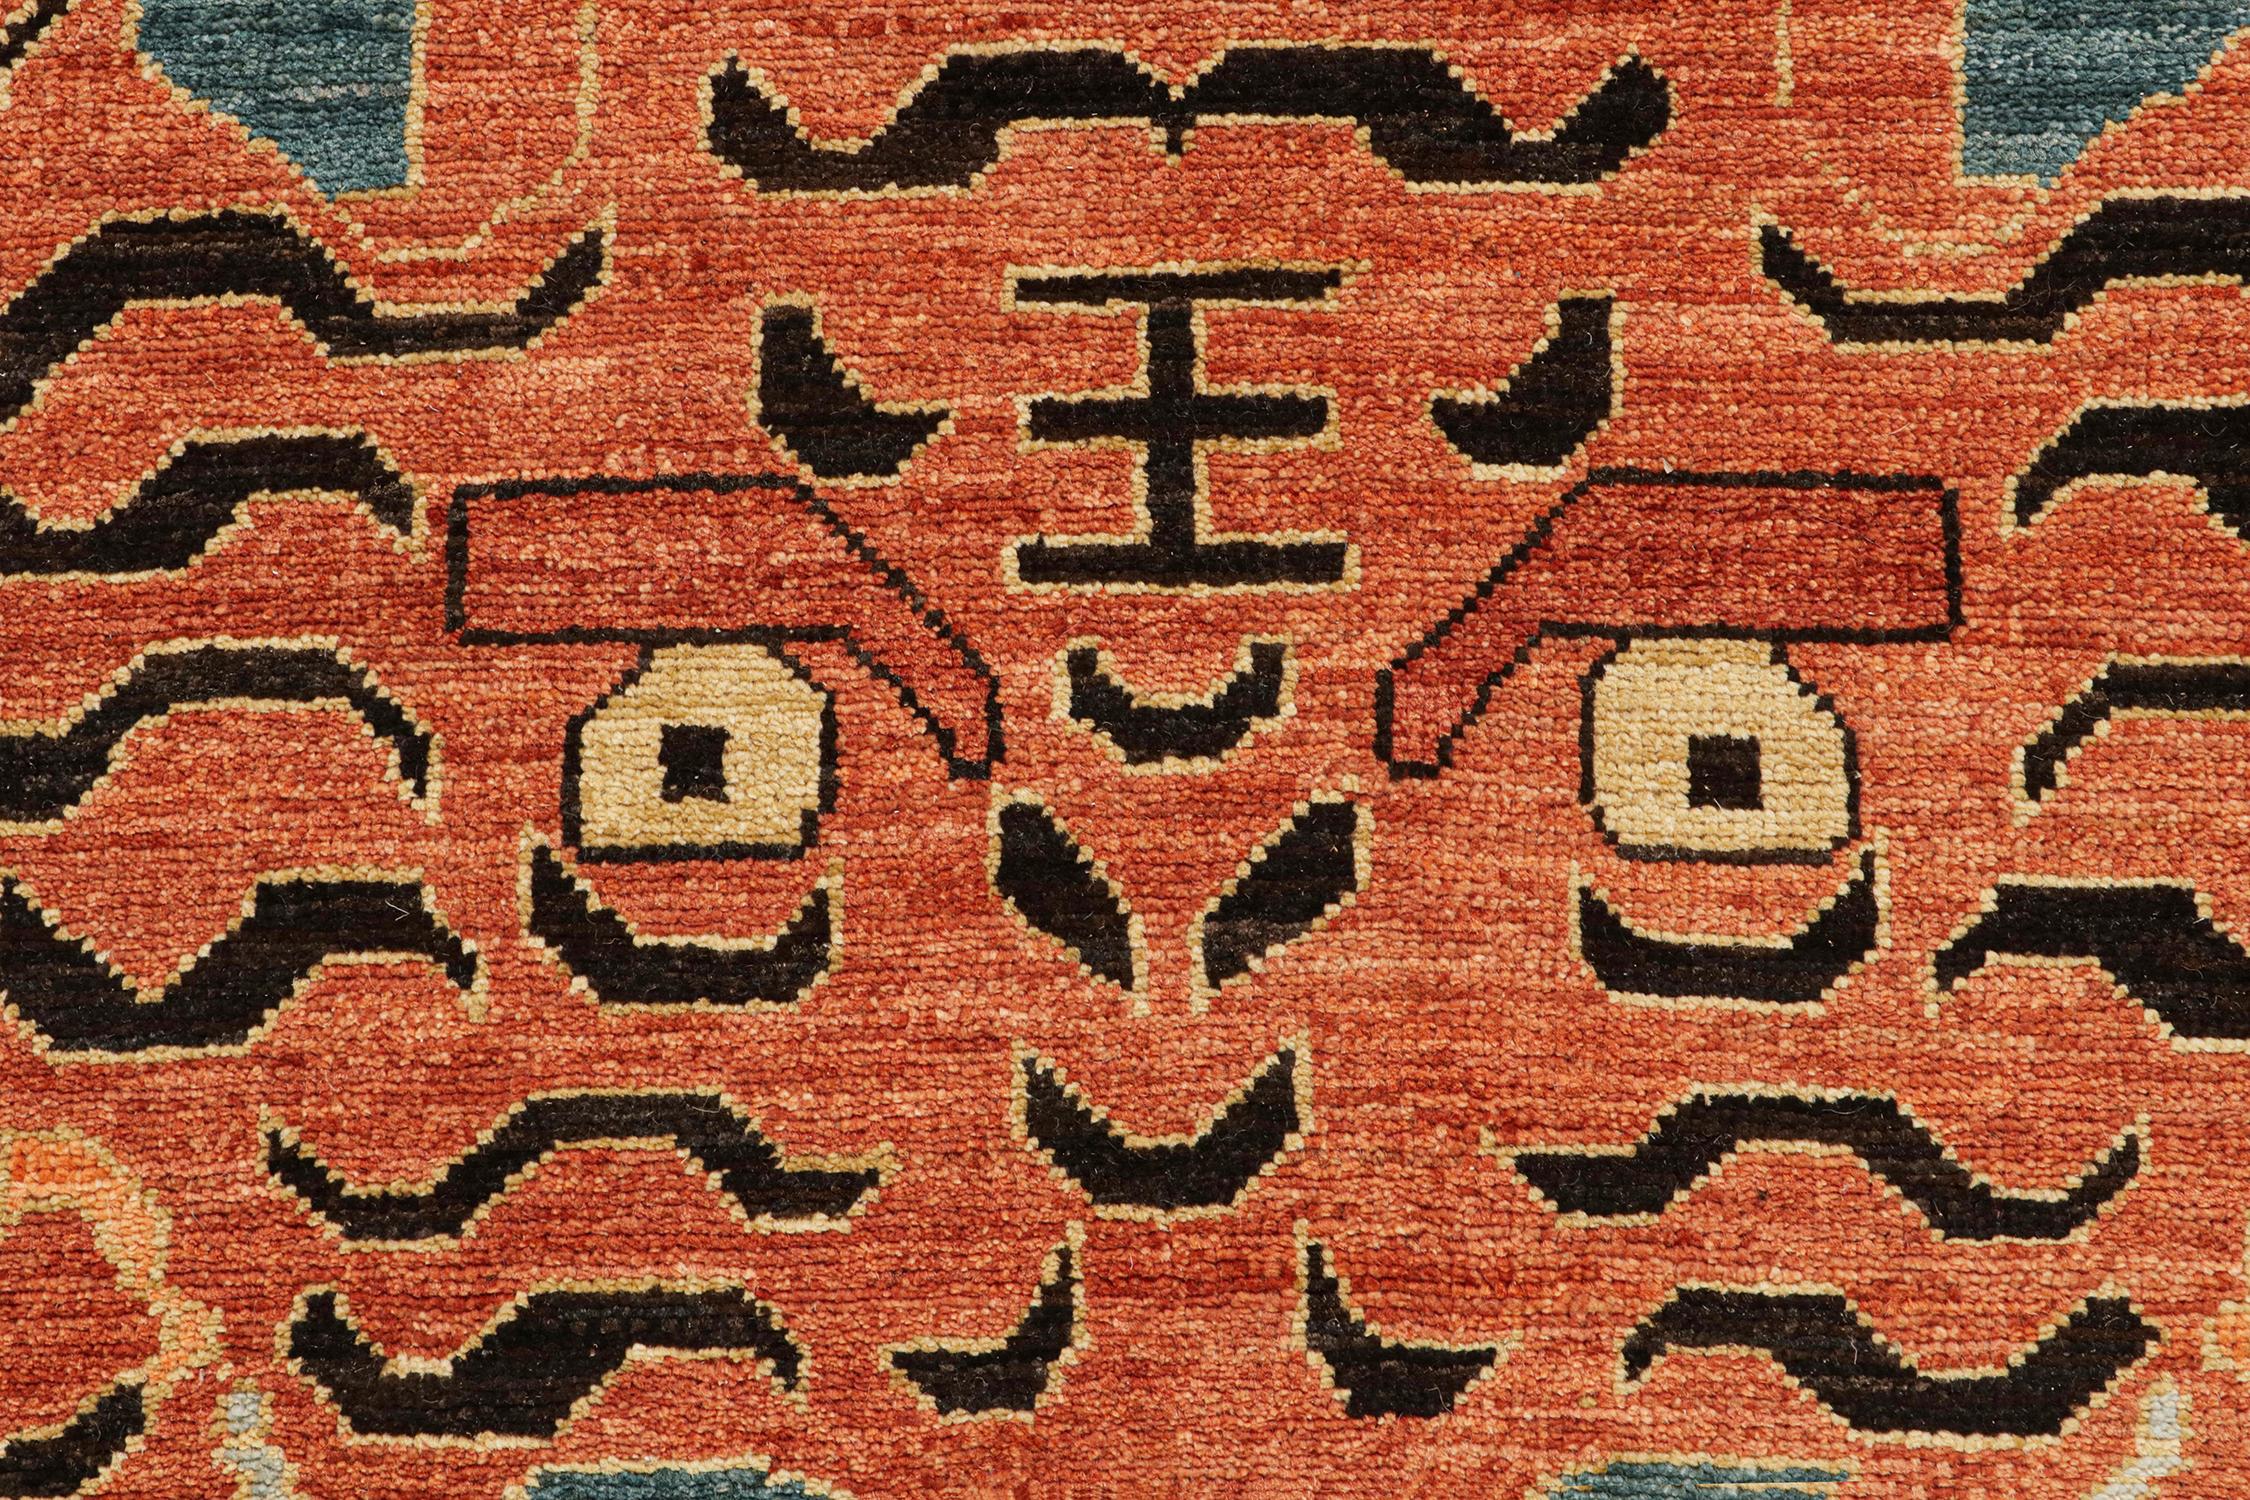 Contemporary Rug & Kilim’s Custom Tiger-Skin Rug Design with Orange and Brown Pictorial For Sale